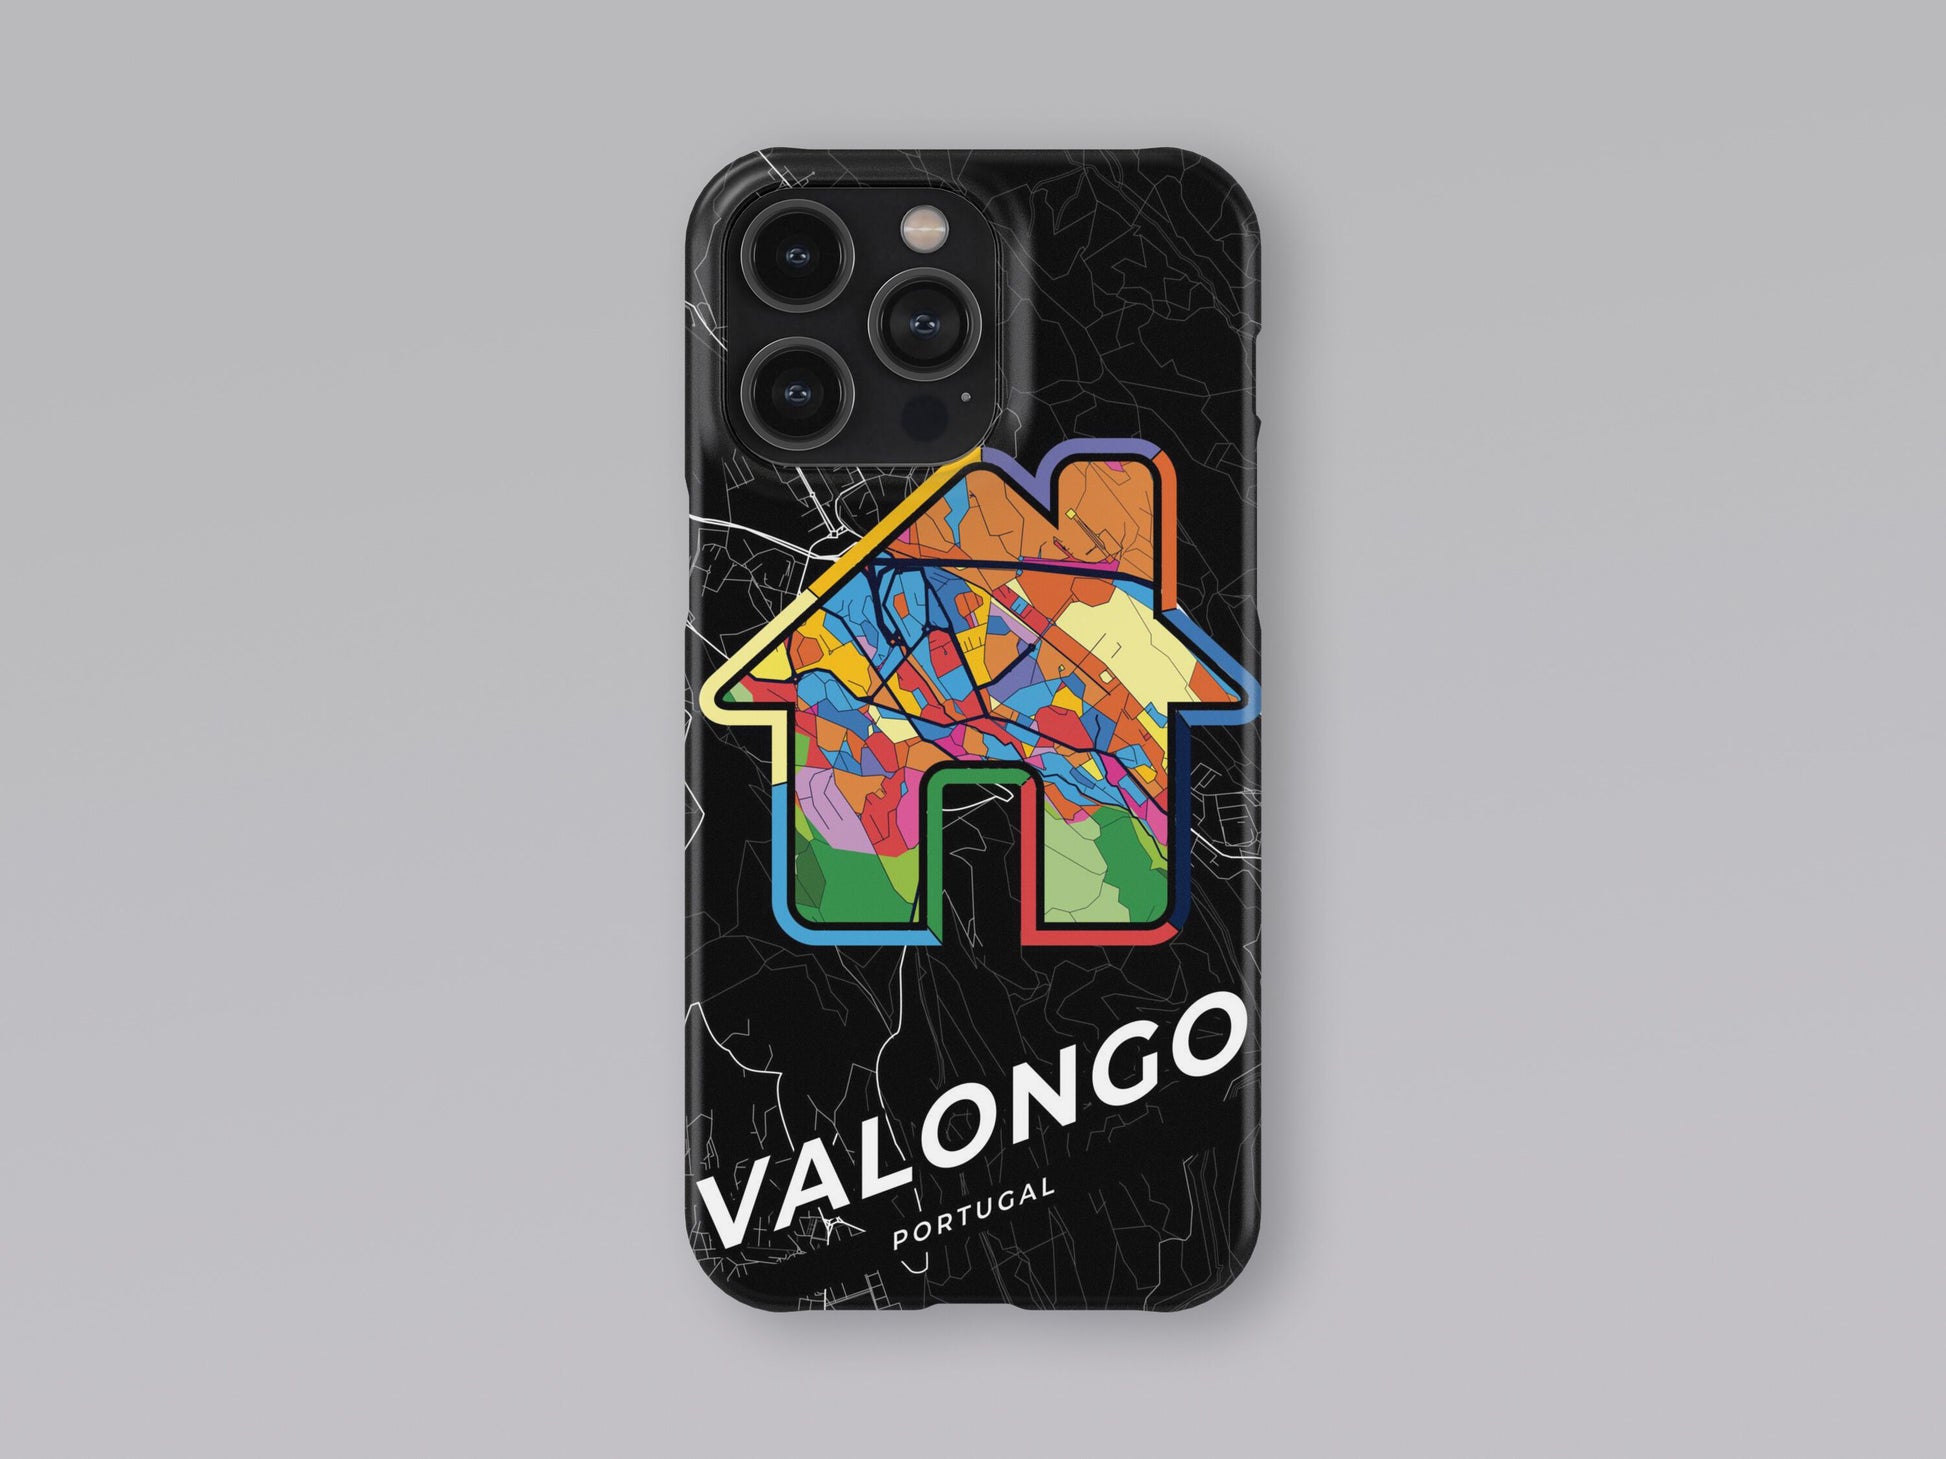 Valongo Portugal slim phone case with colorful icon 3